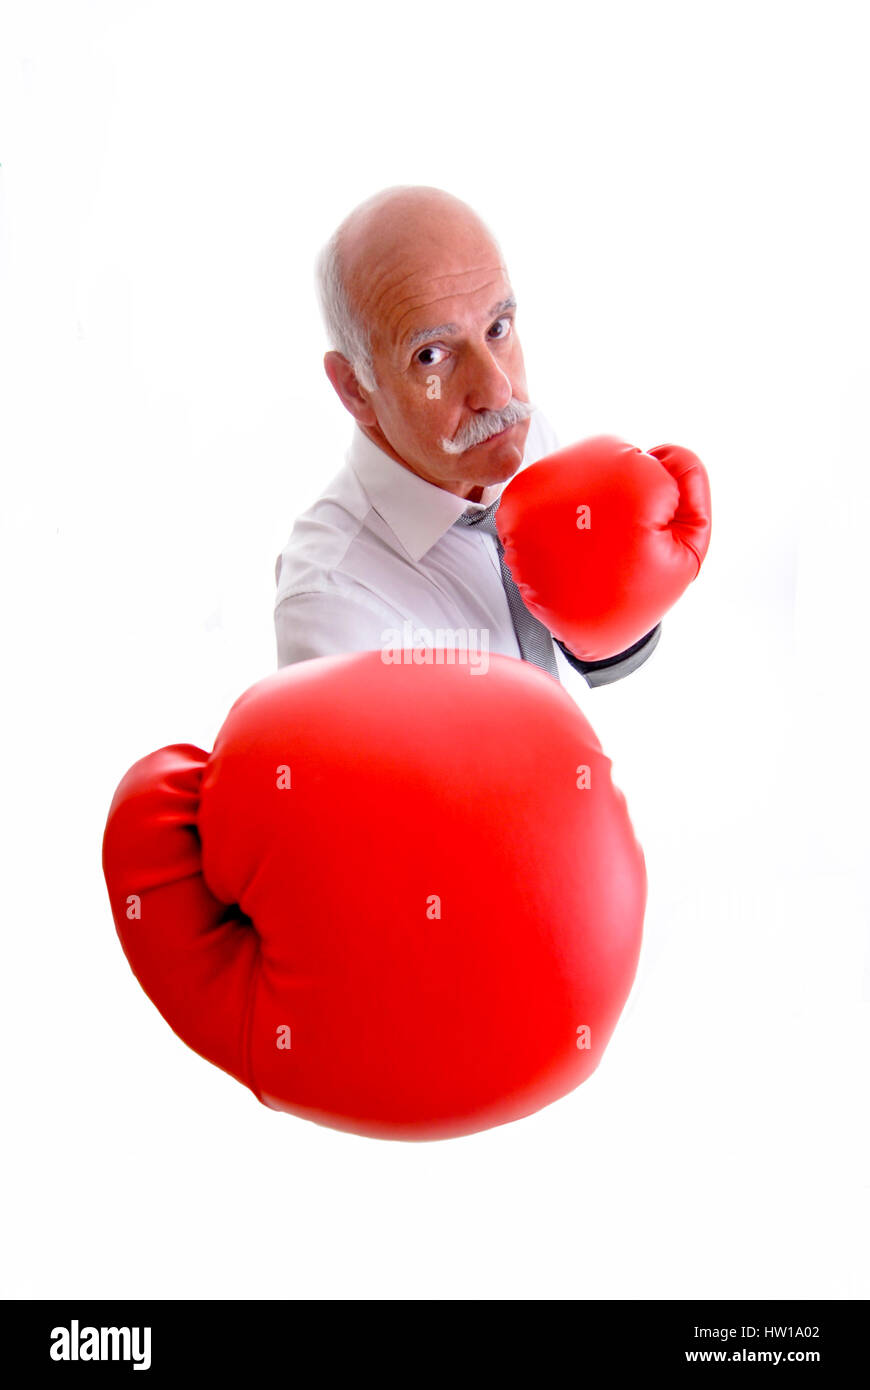 Pensioner with boxing gloves, Rentner mit Boxhandschuhe Stock Photo